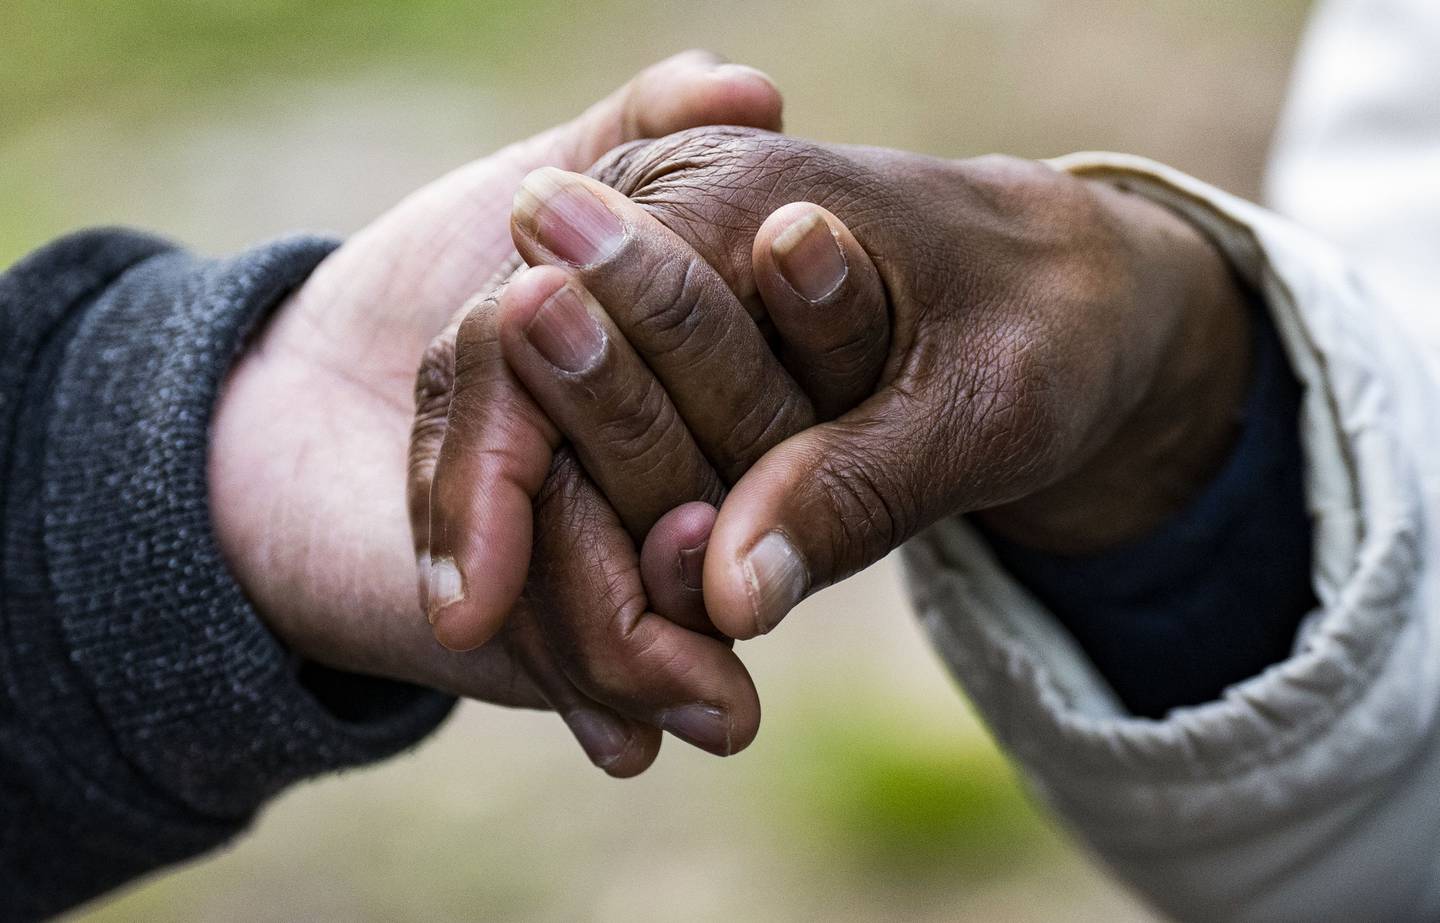 Members of the Good Trouble Church hold hands in prayer during the church’s Family Life service at The Ynot Lot in Baltimore, May 11, 2023.